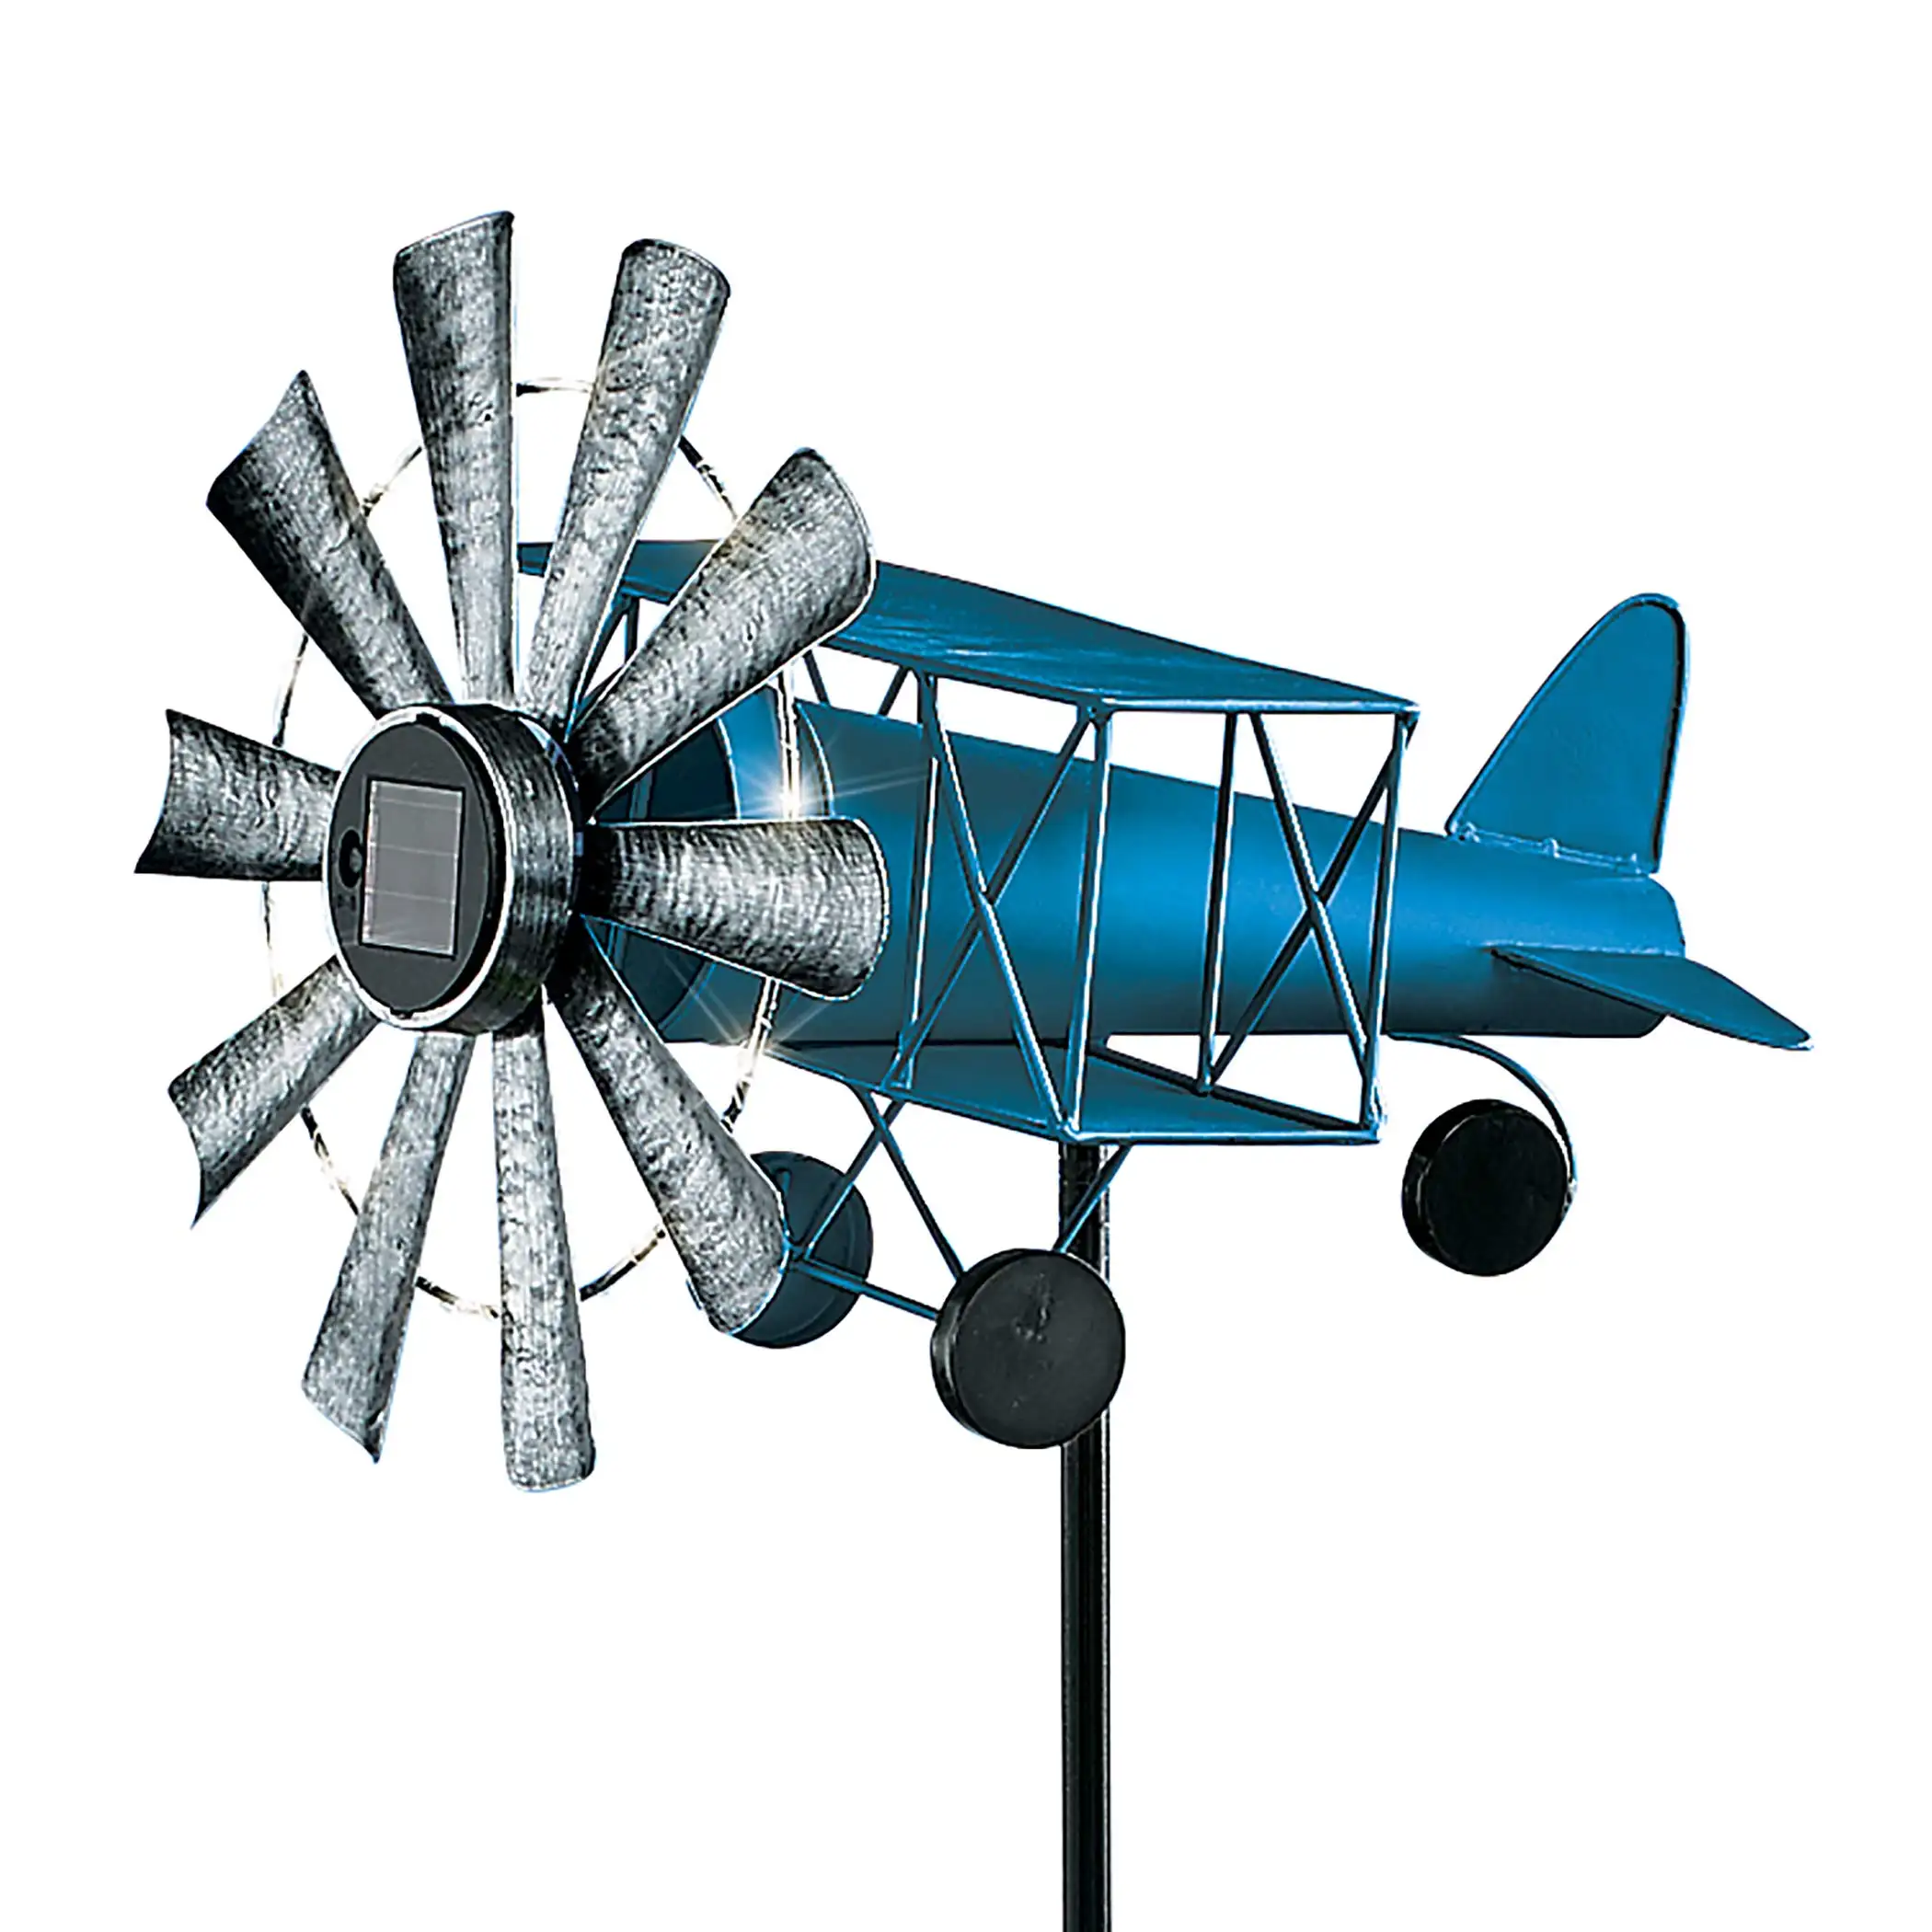 A model of a rotating stake in a propeller aircraft